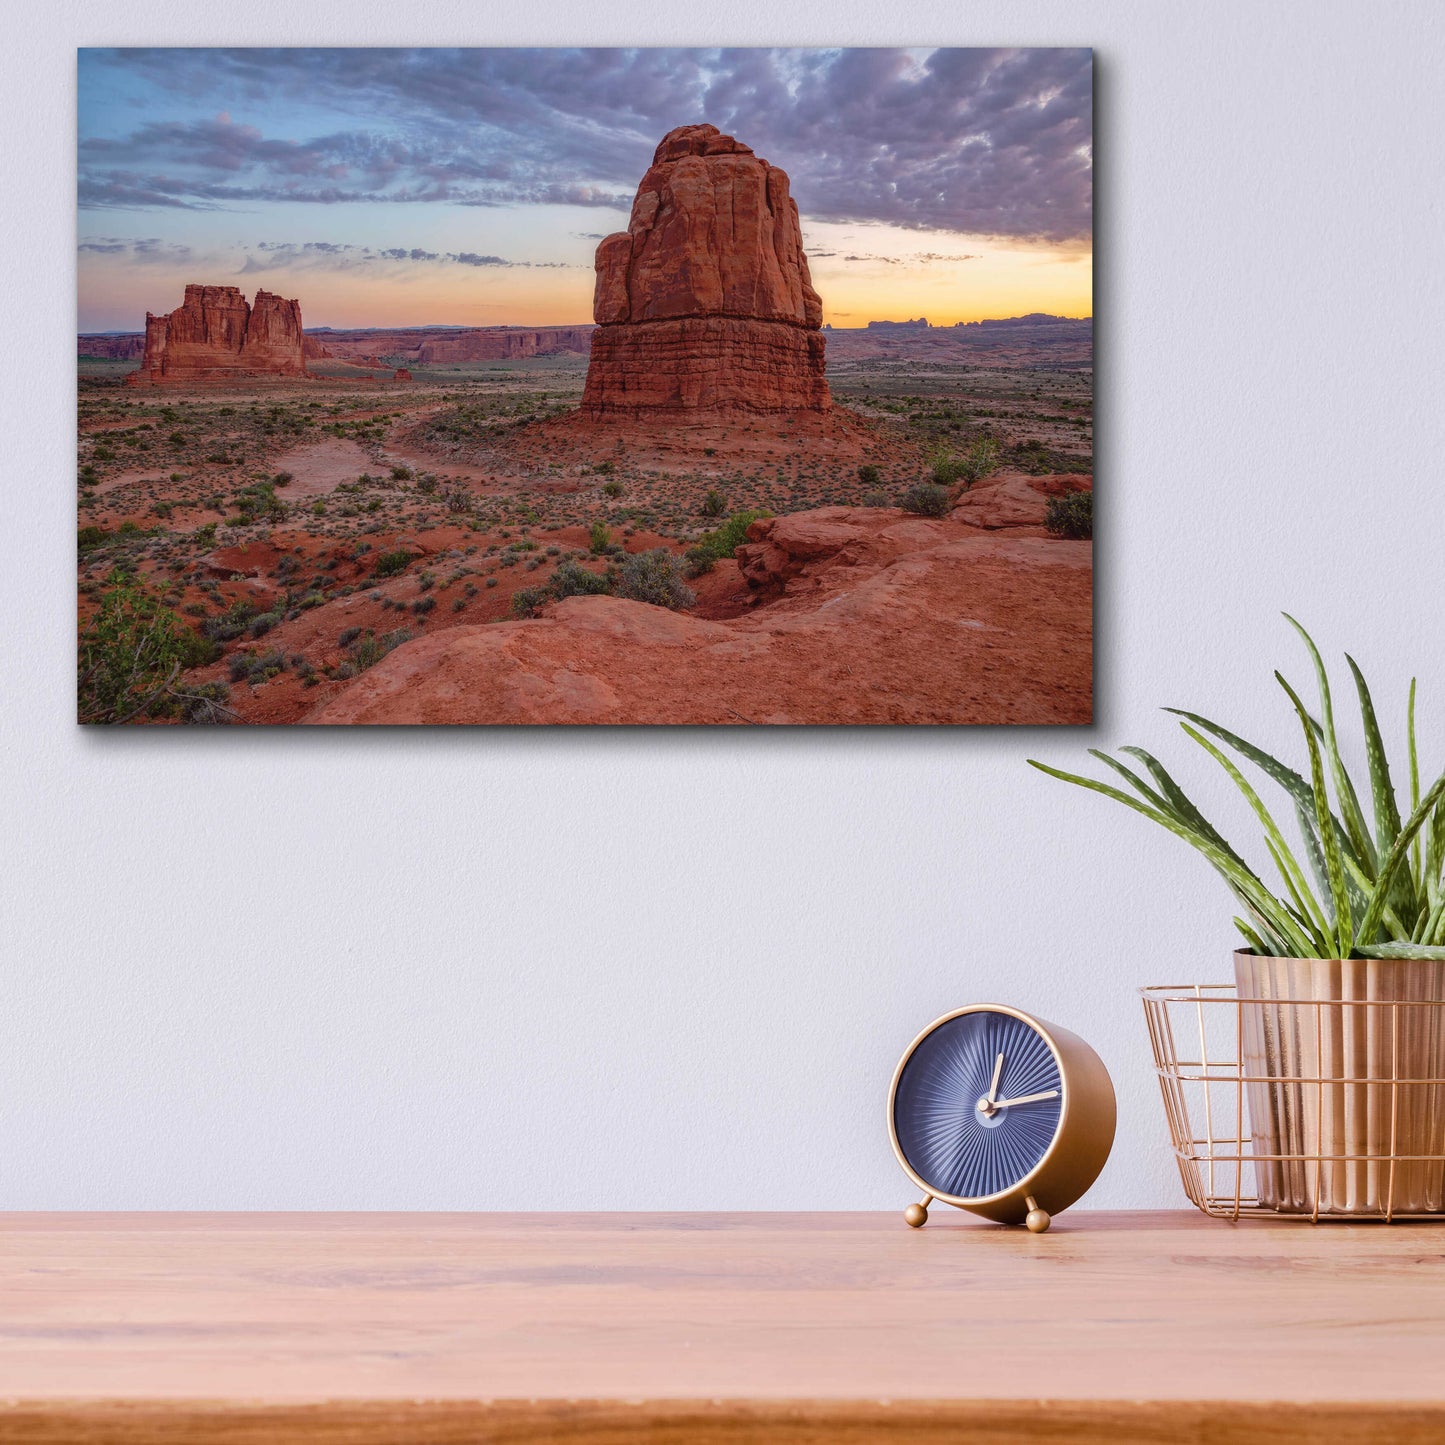 Epic Art 'Valley Views - Arches National Park' by Darren White, Acrylic Glass Wall Art,16x12